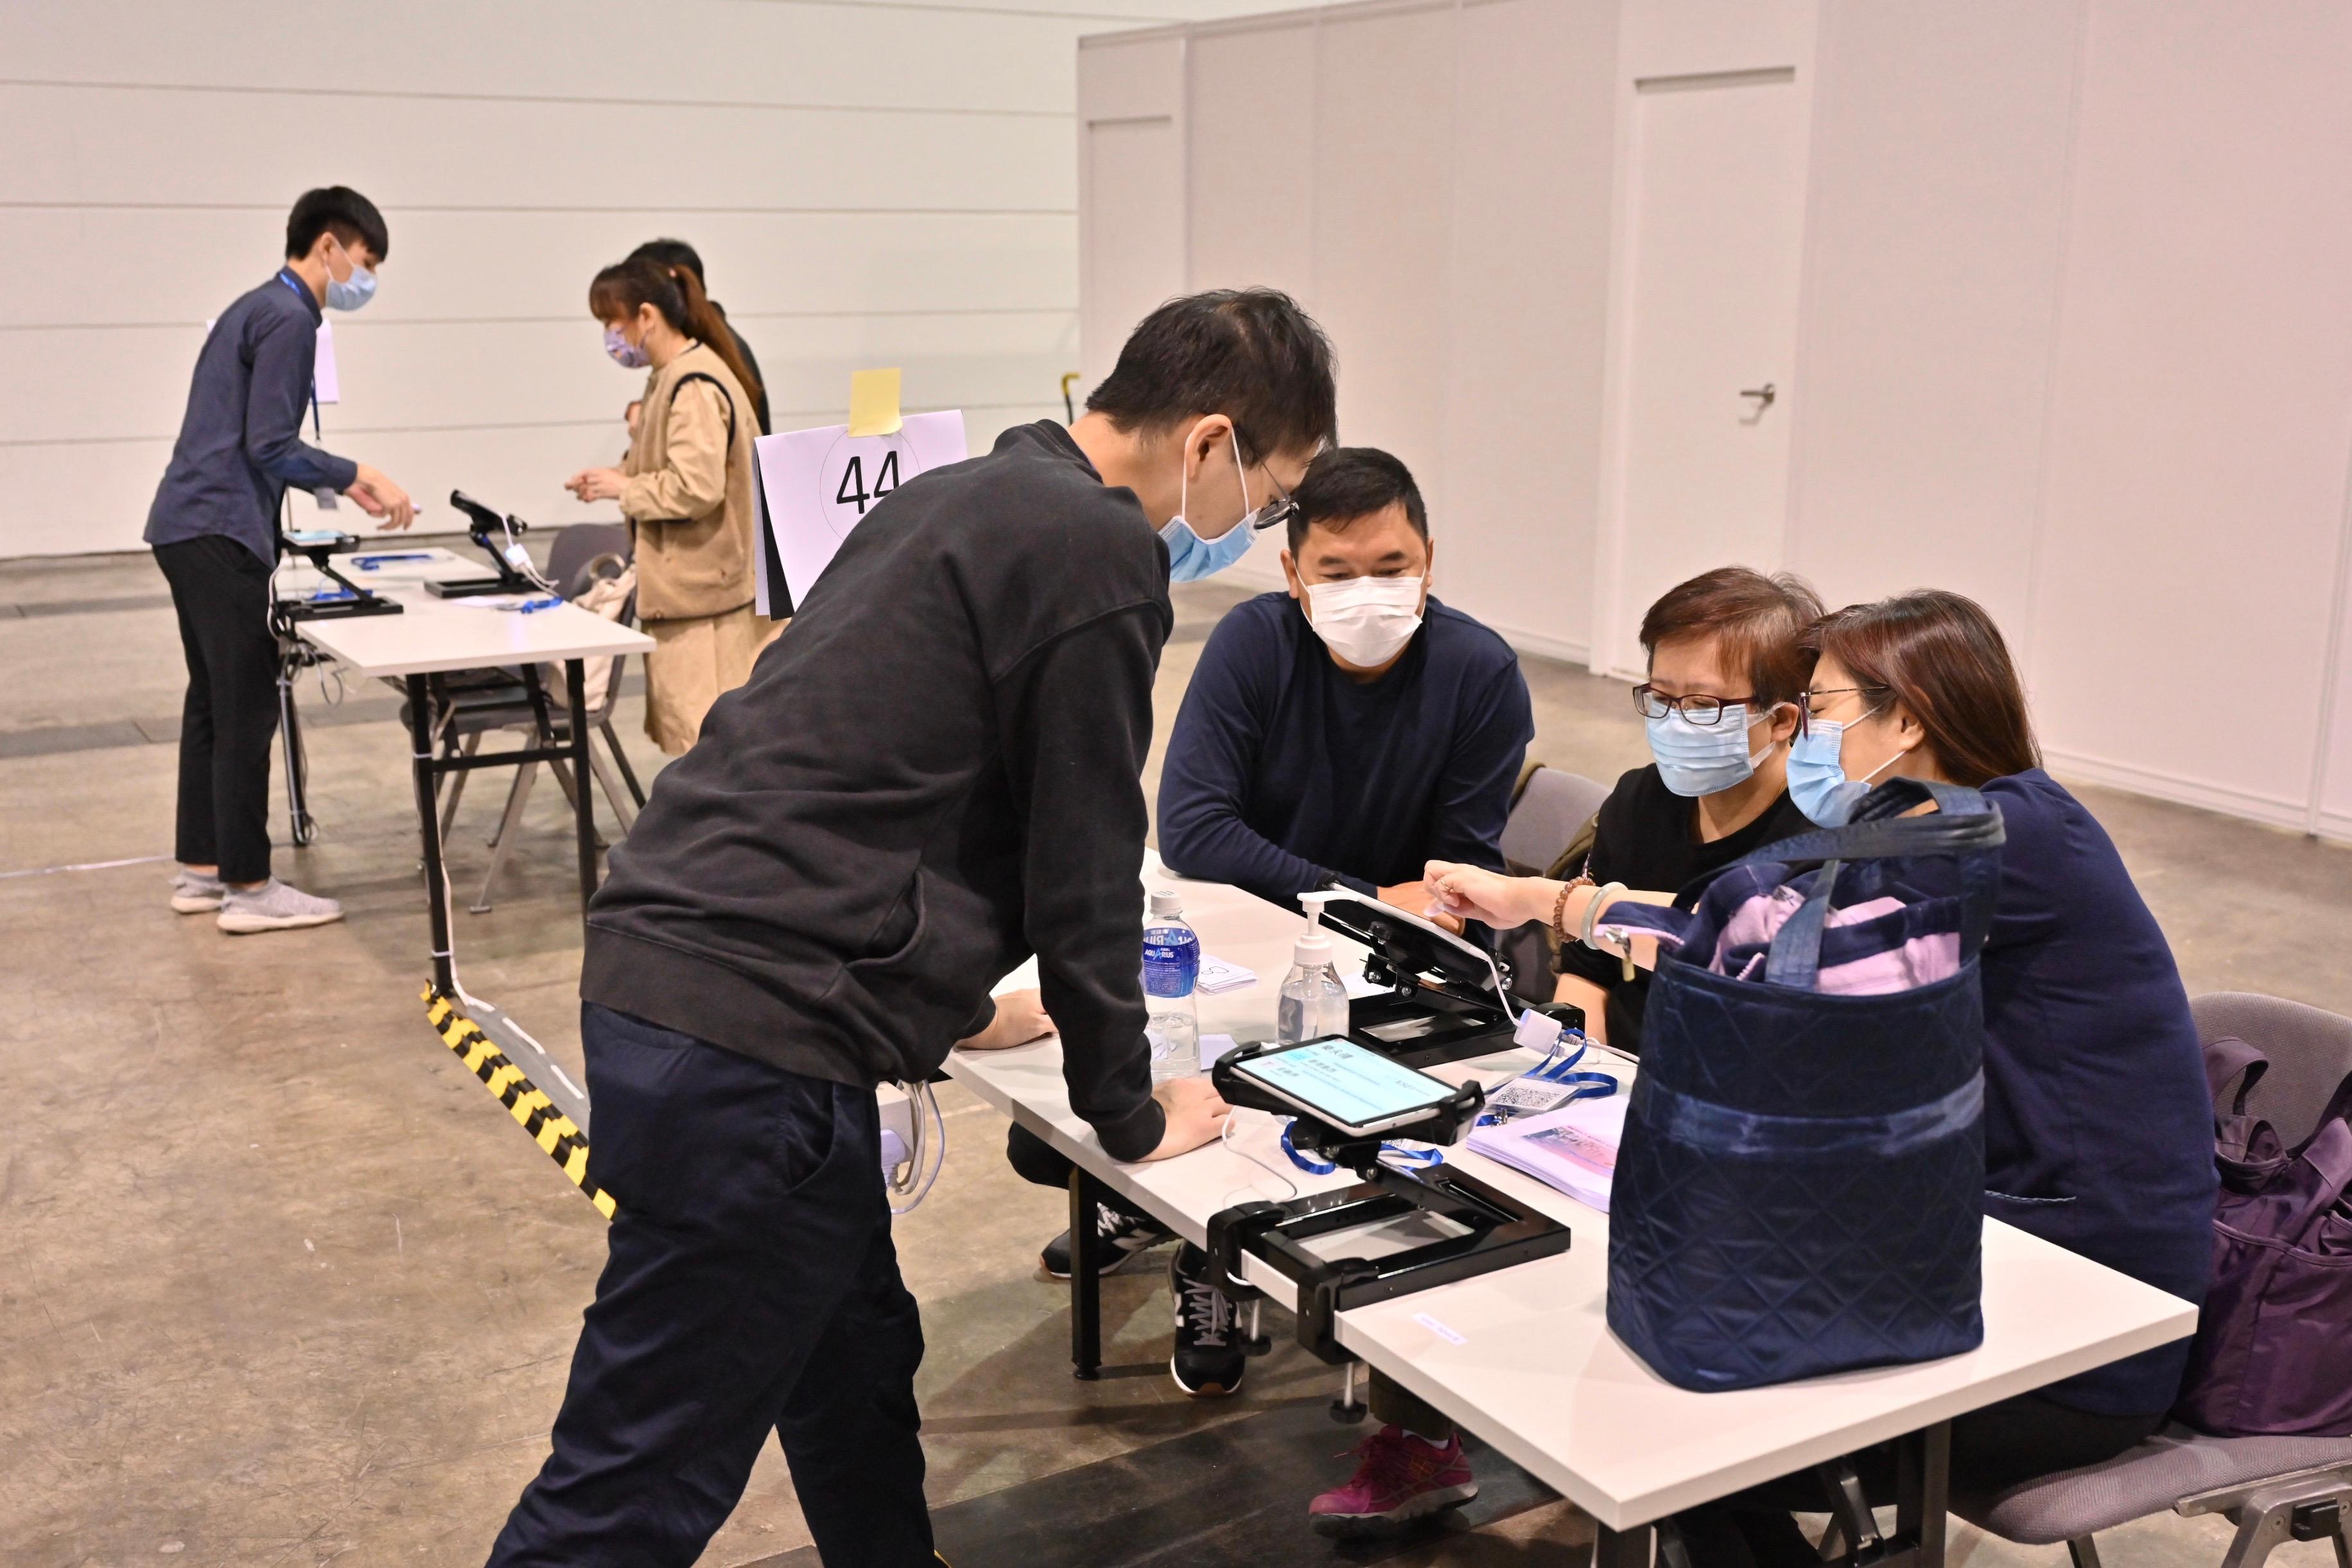 The 2021 Legislative Council General Election will be held on December 19. The Registration and Electoral Office organised a total of 20 hands-on practice sessions on the Electronic Poll Register system for over 10 000 polling staff. Photo shows polling staff learning to operate the system.